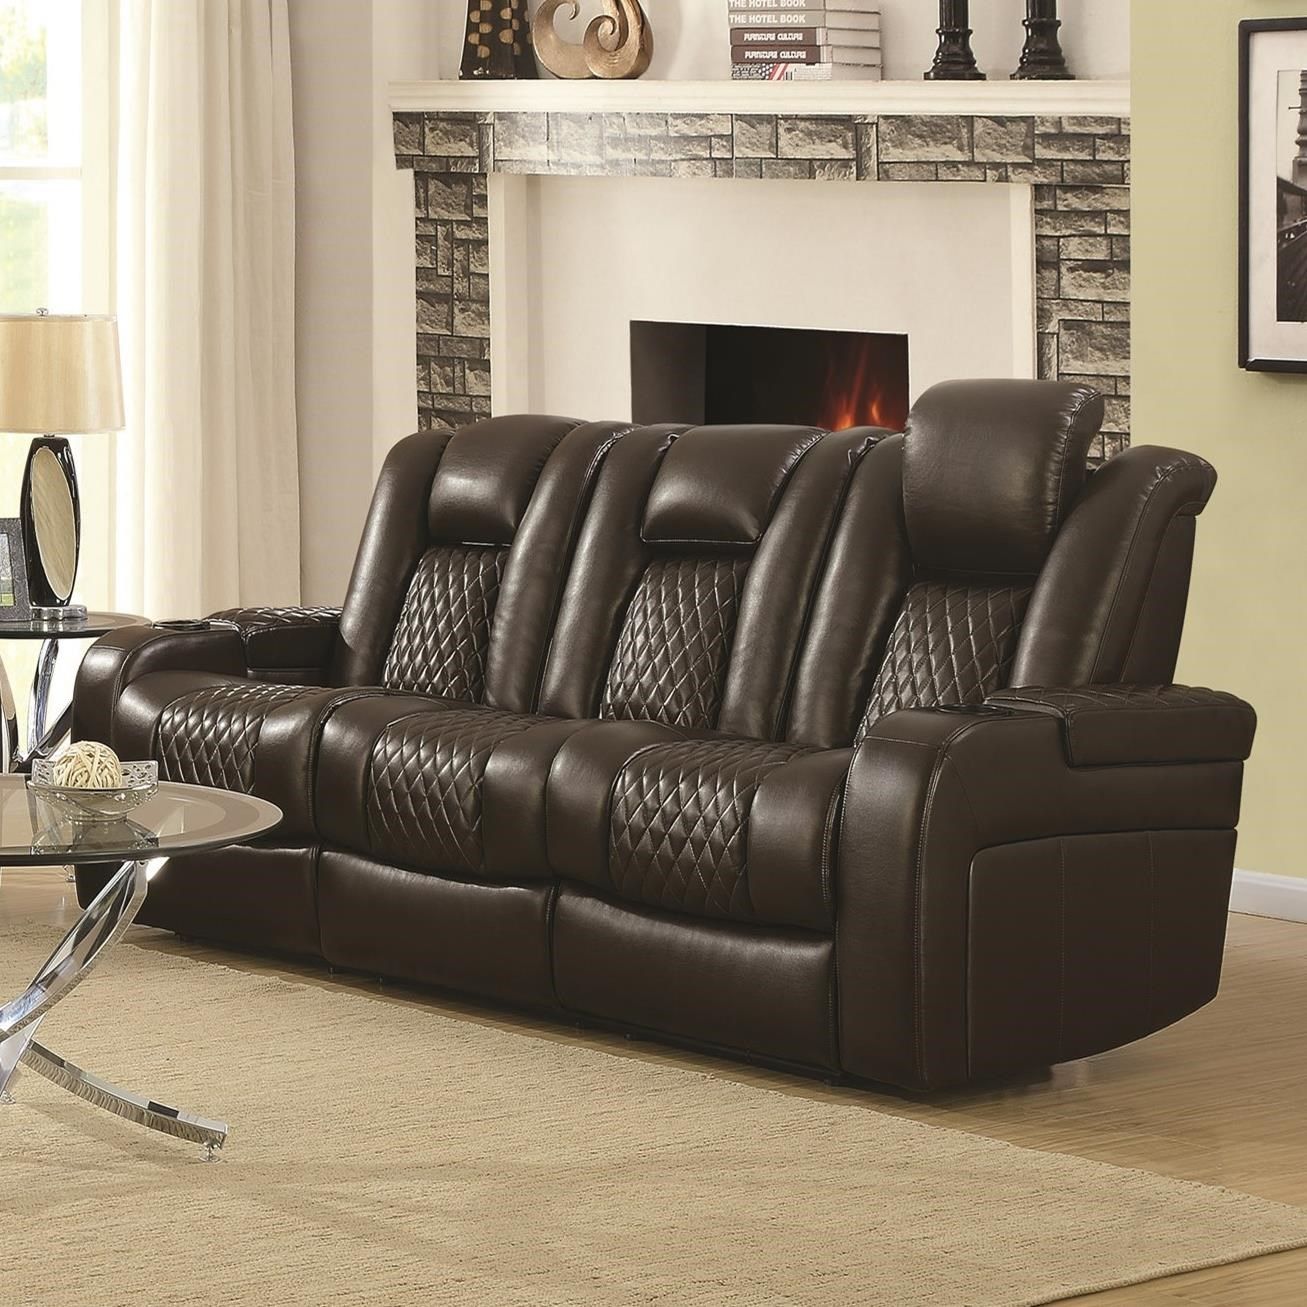 Delangelo Casual Power Reclining Sofa With Cup Holders Inside Expedition Brown Power Reclining Sofas (View 9 of 15)